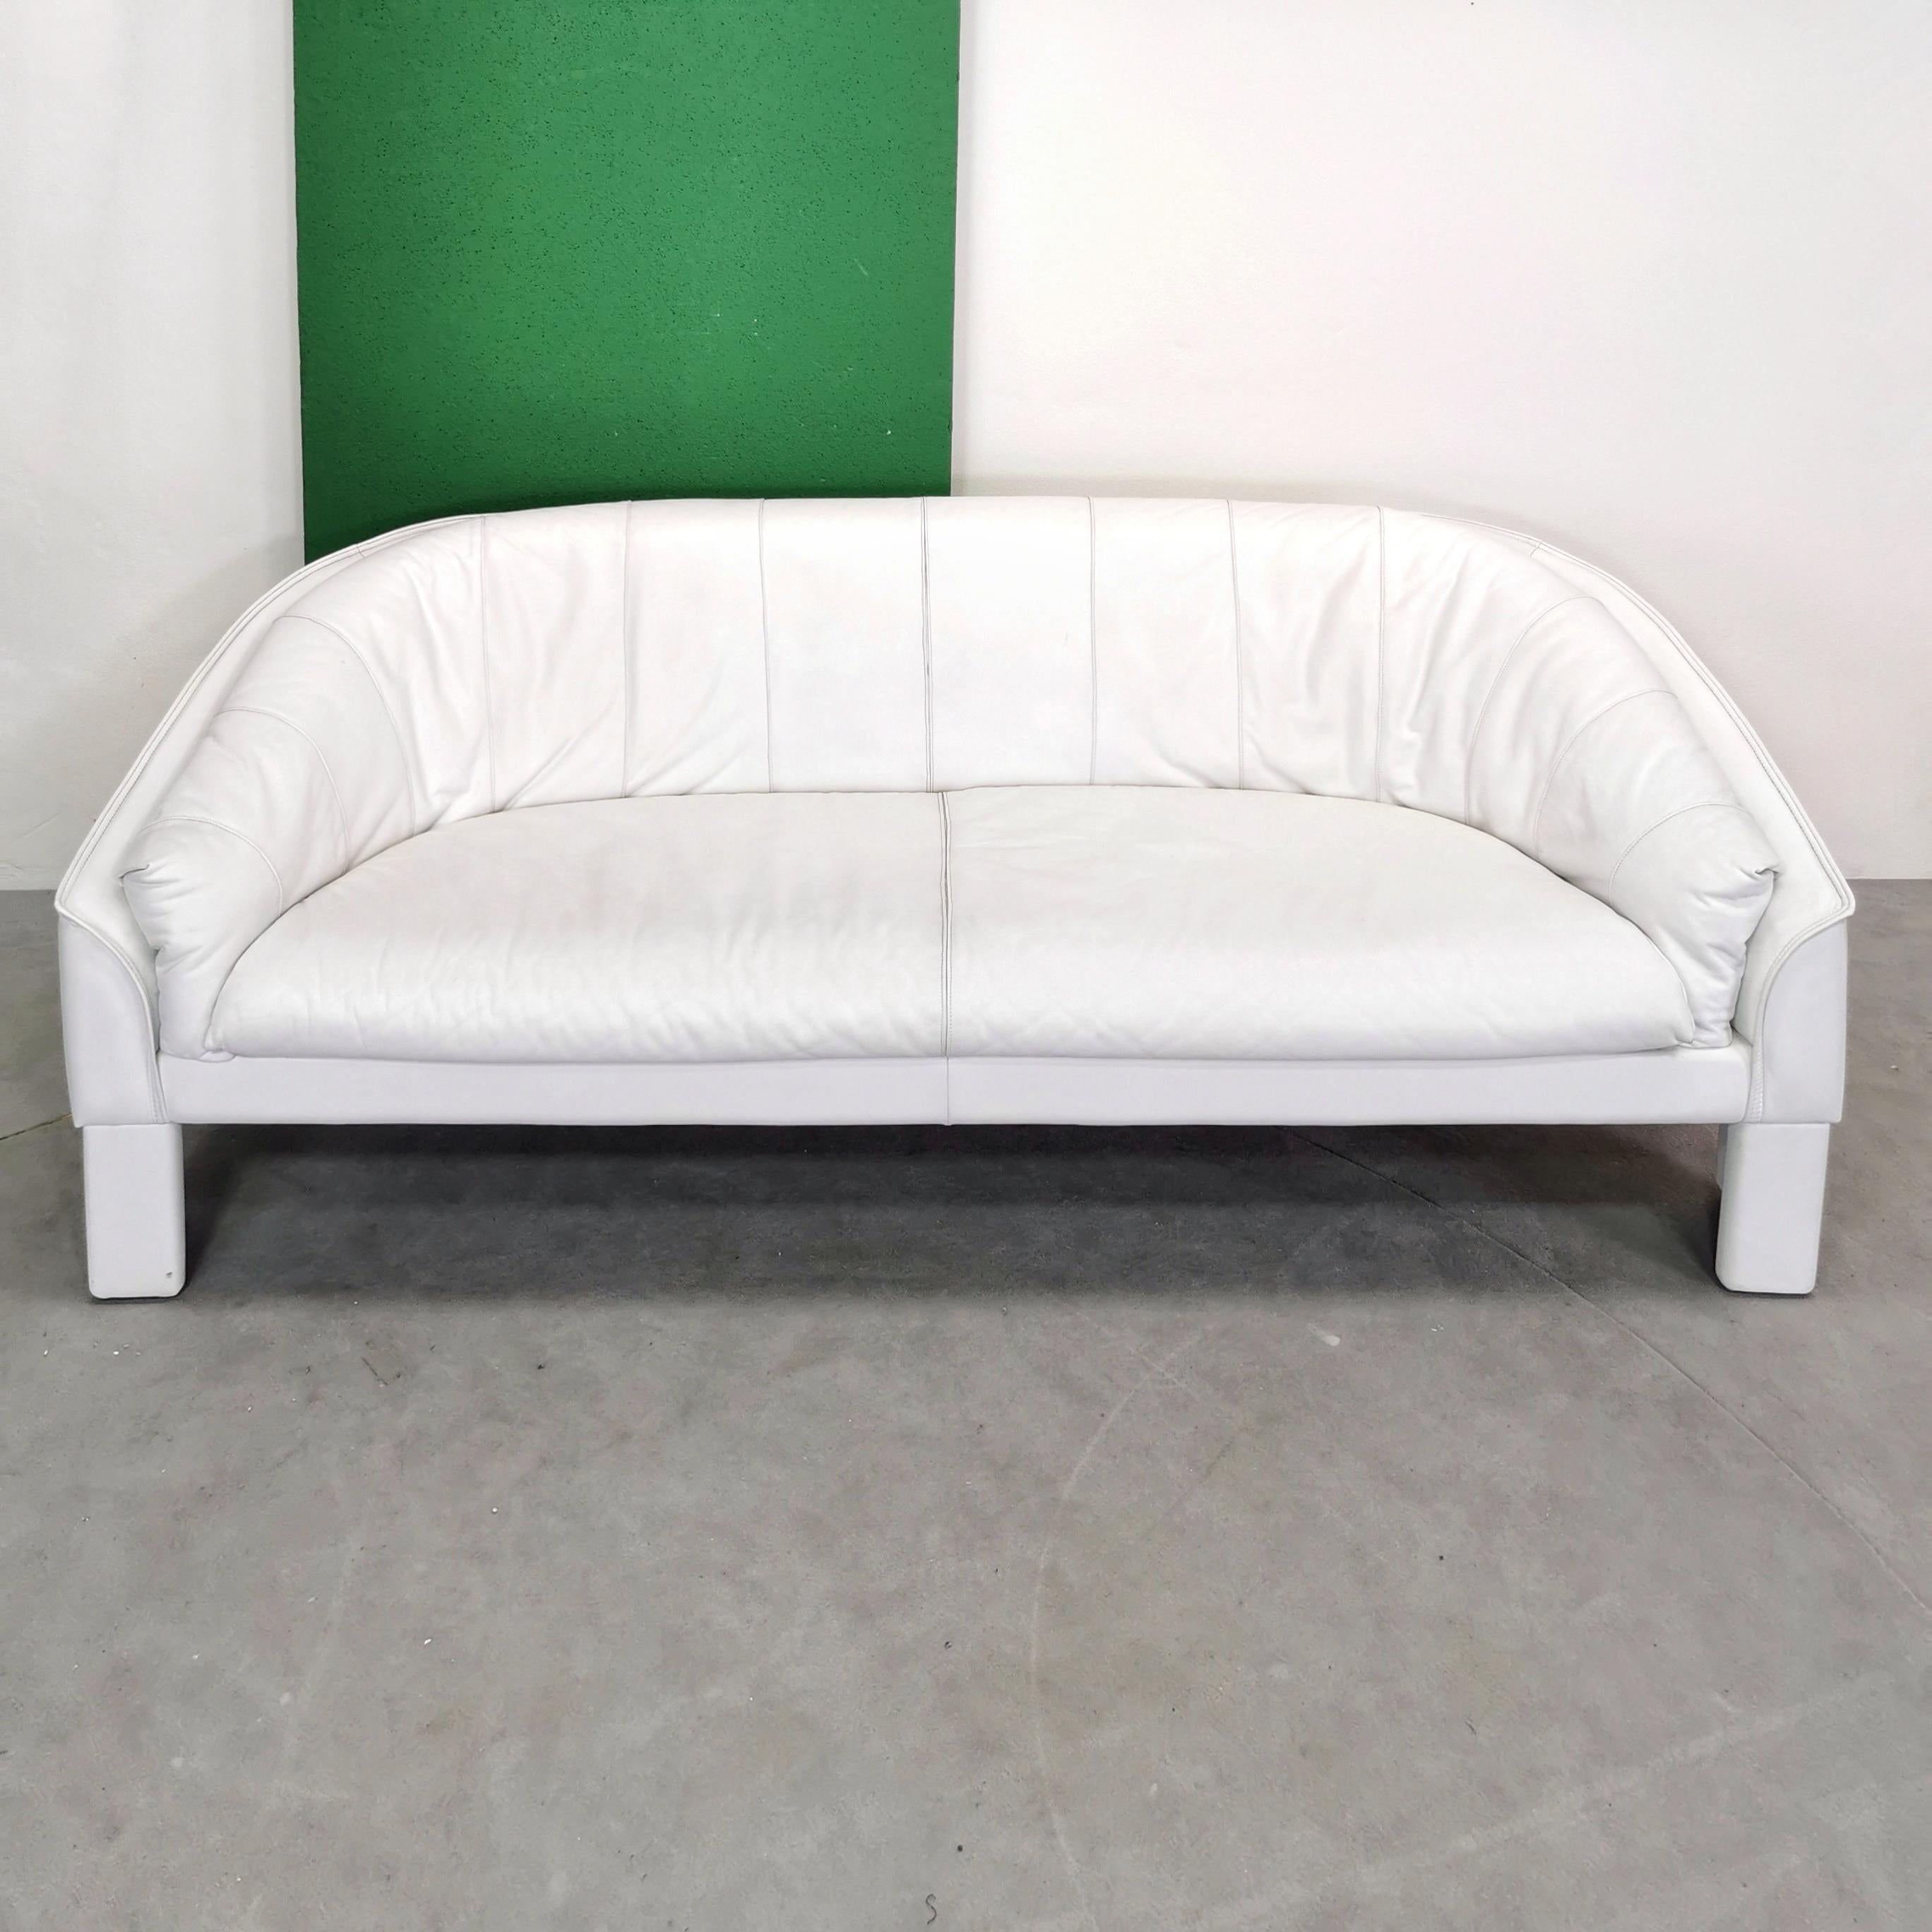 Leather 1980s white leather sofa manufactured by Marac For Sale